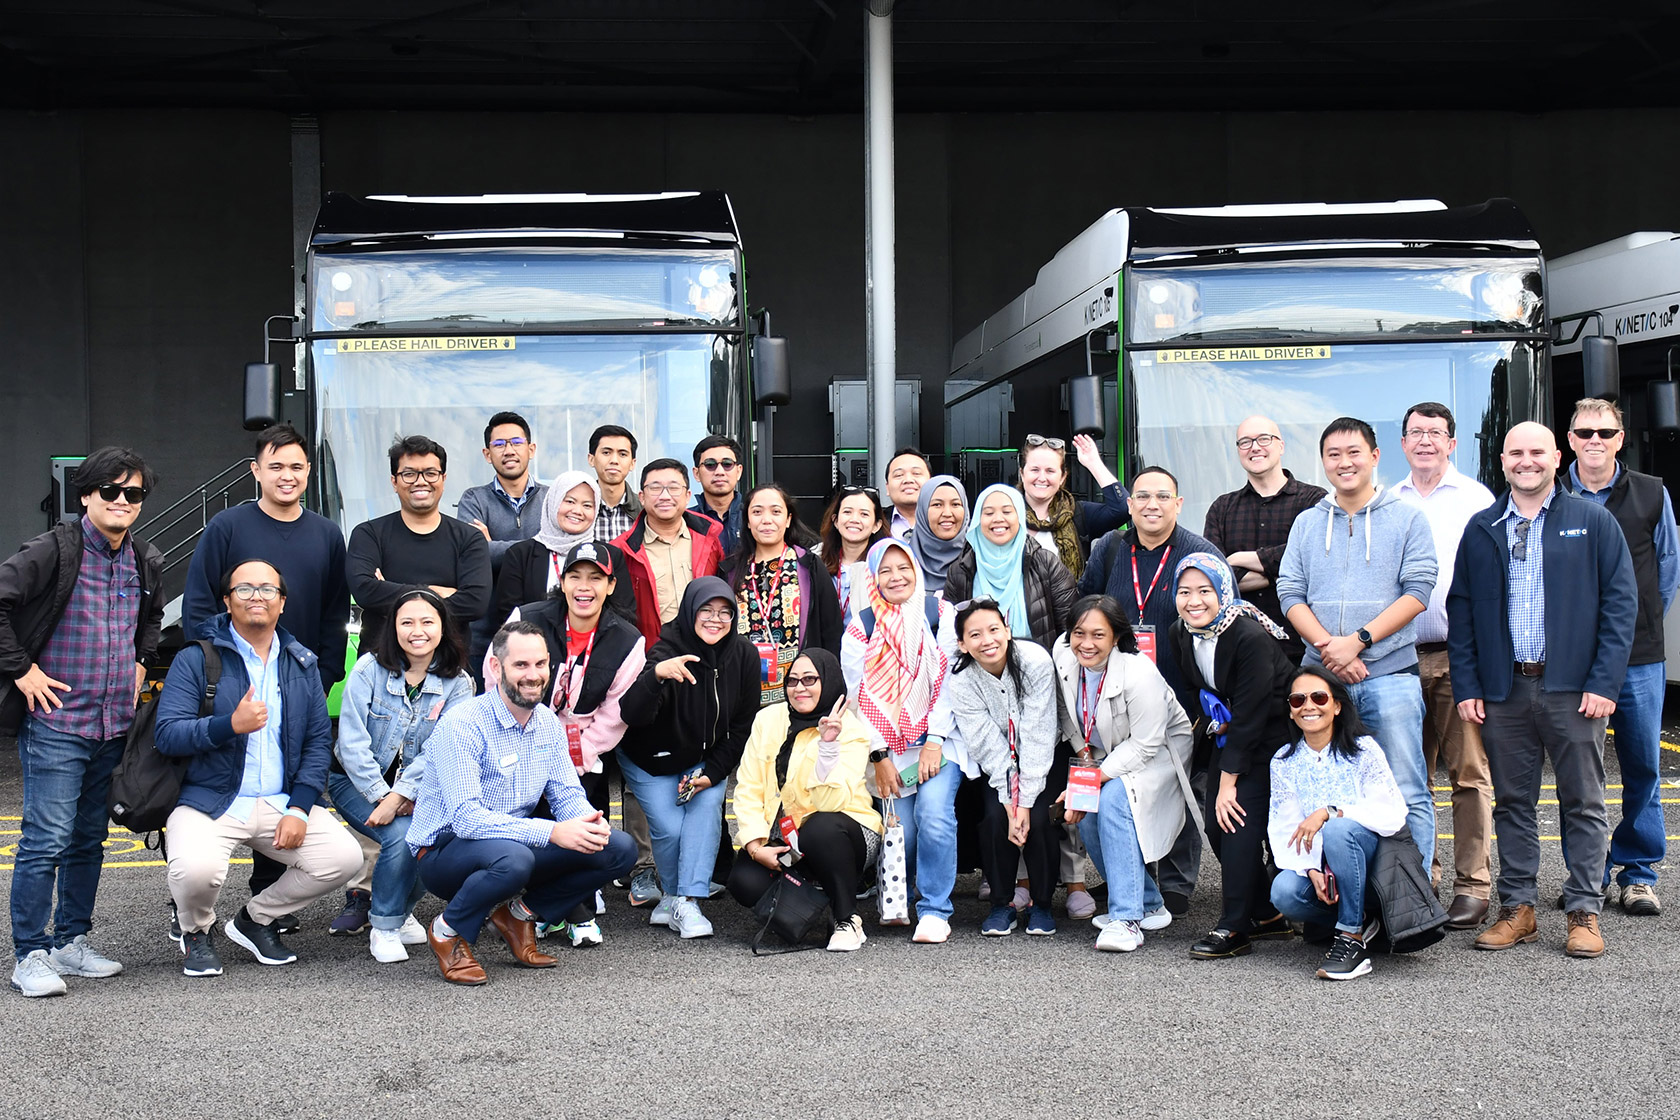 Participants of the Public Transport Management Short Course are smiling and posing in front of buses.